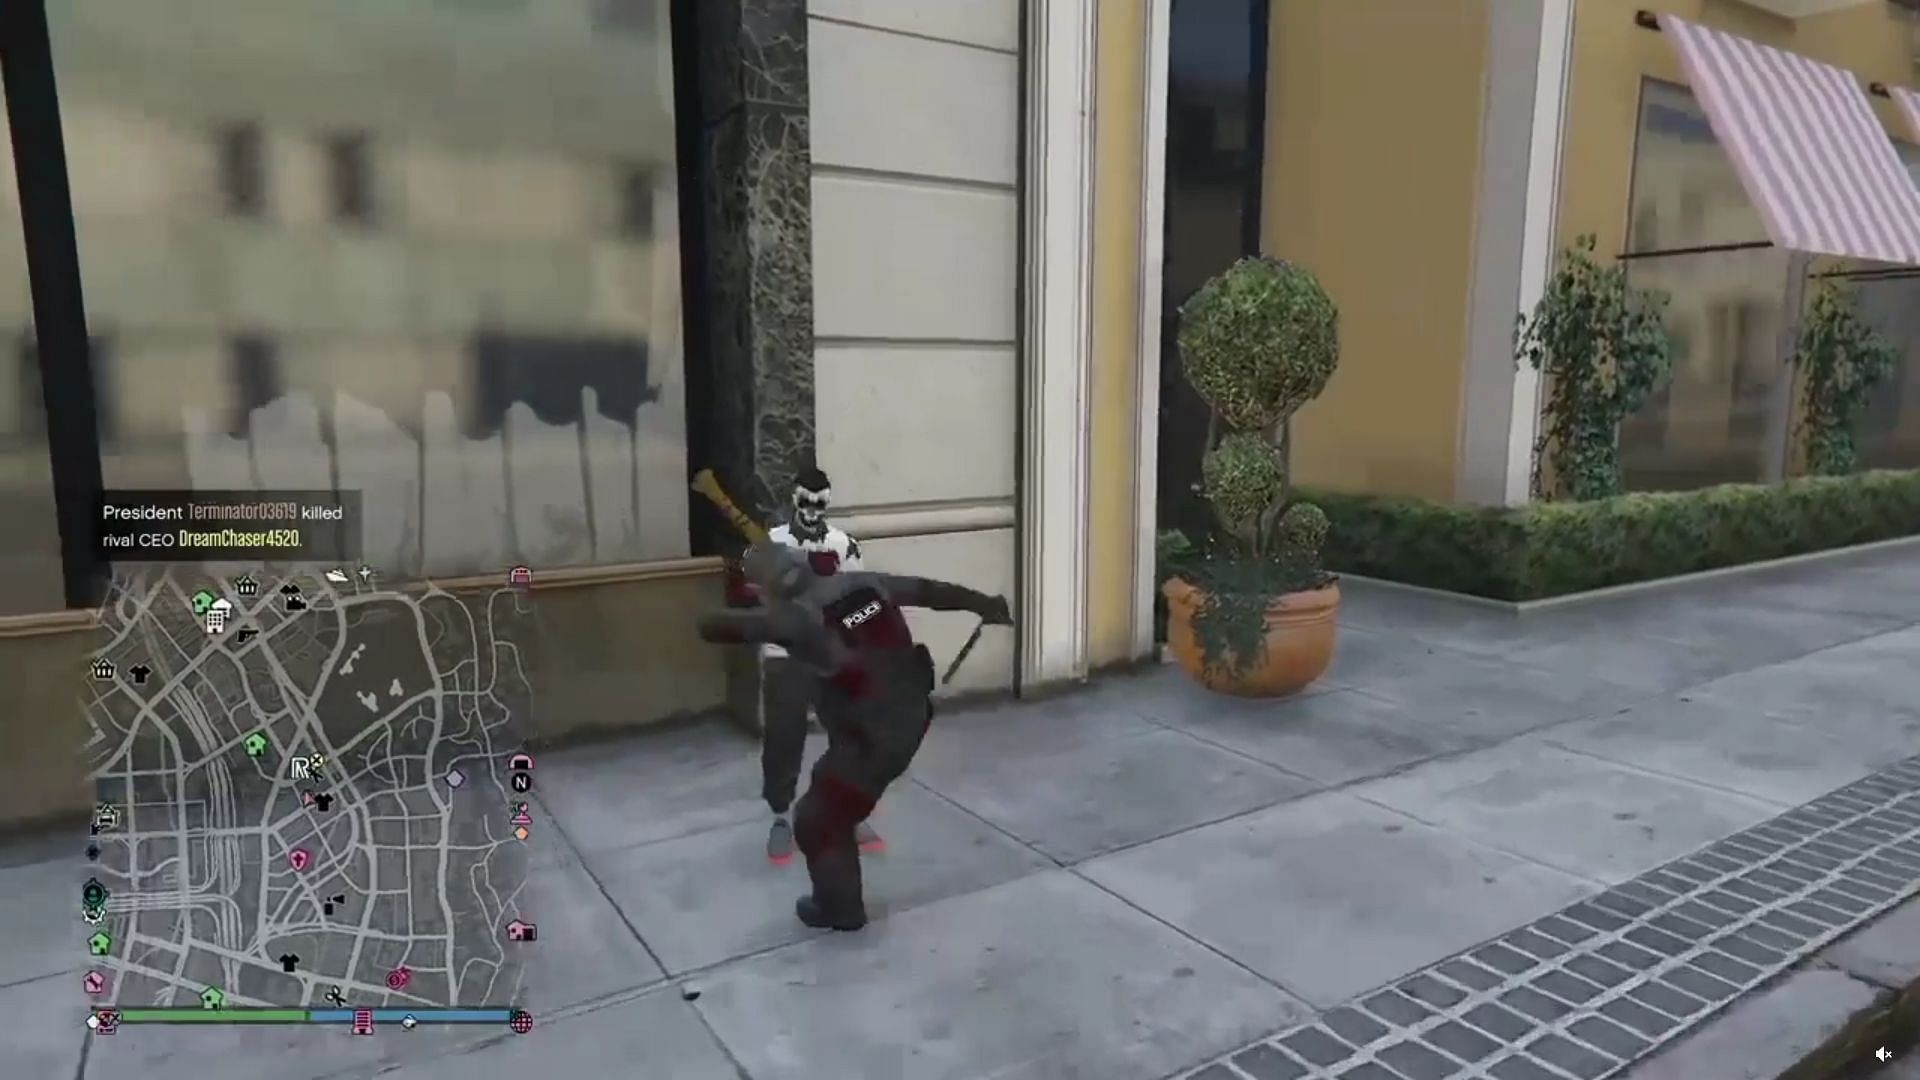 GTA Online has many godmode glitches, griefers often abuse them (Image via Reddit/fuego_bellzalito62)